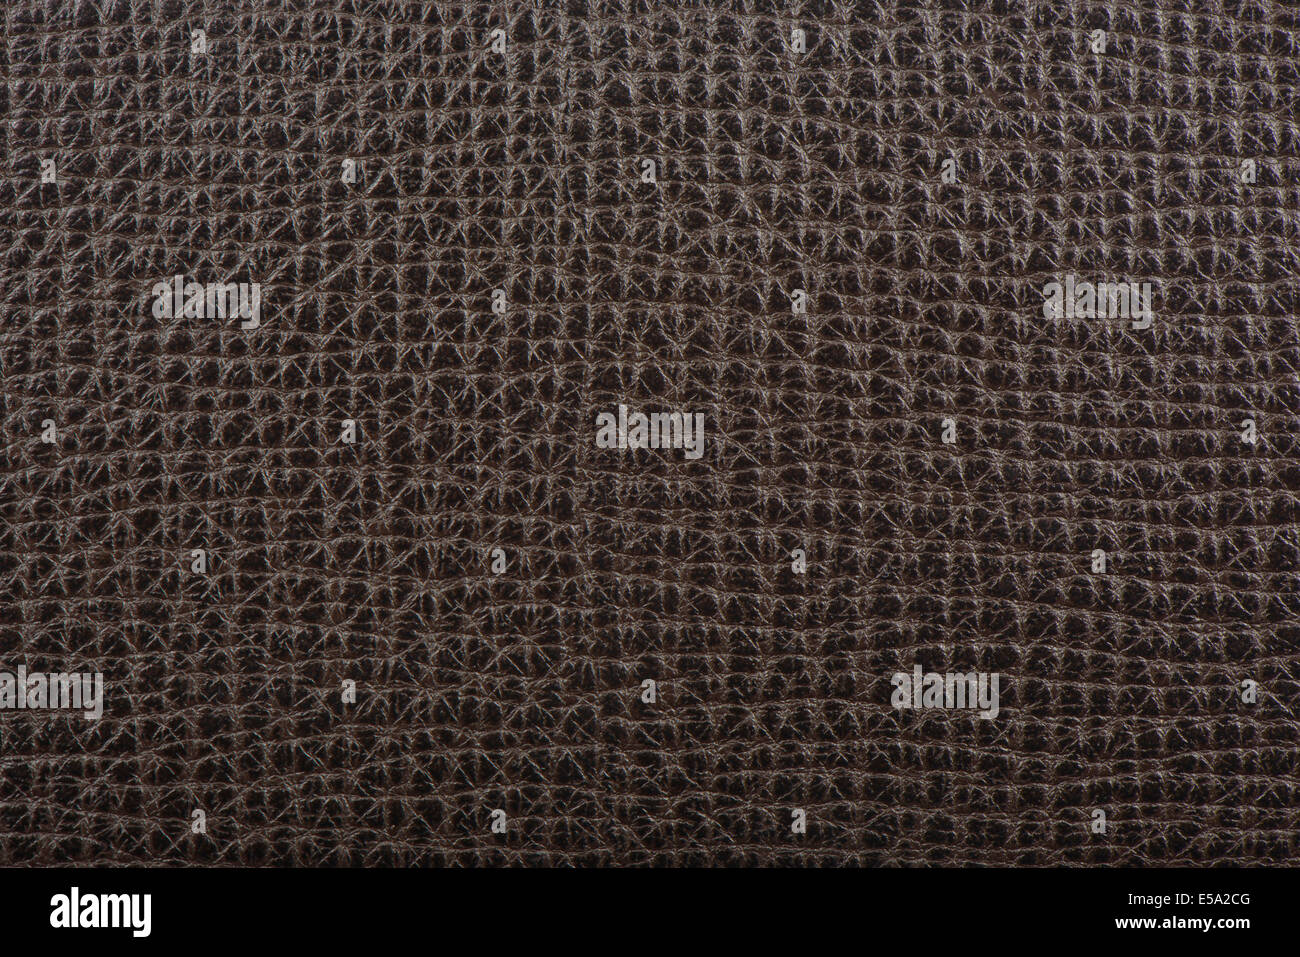 closeup of wrinkled natural brown leather texture Stock Photo